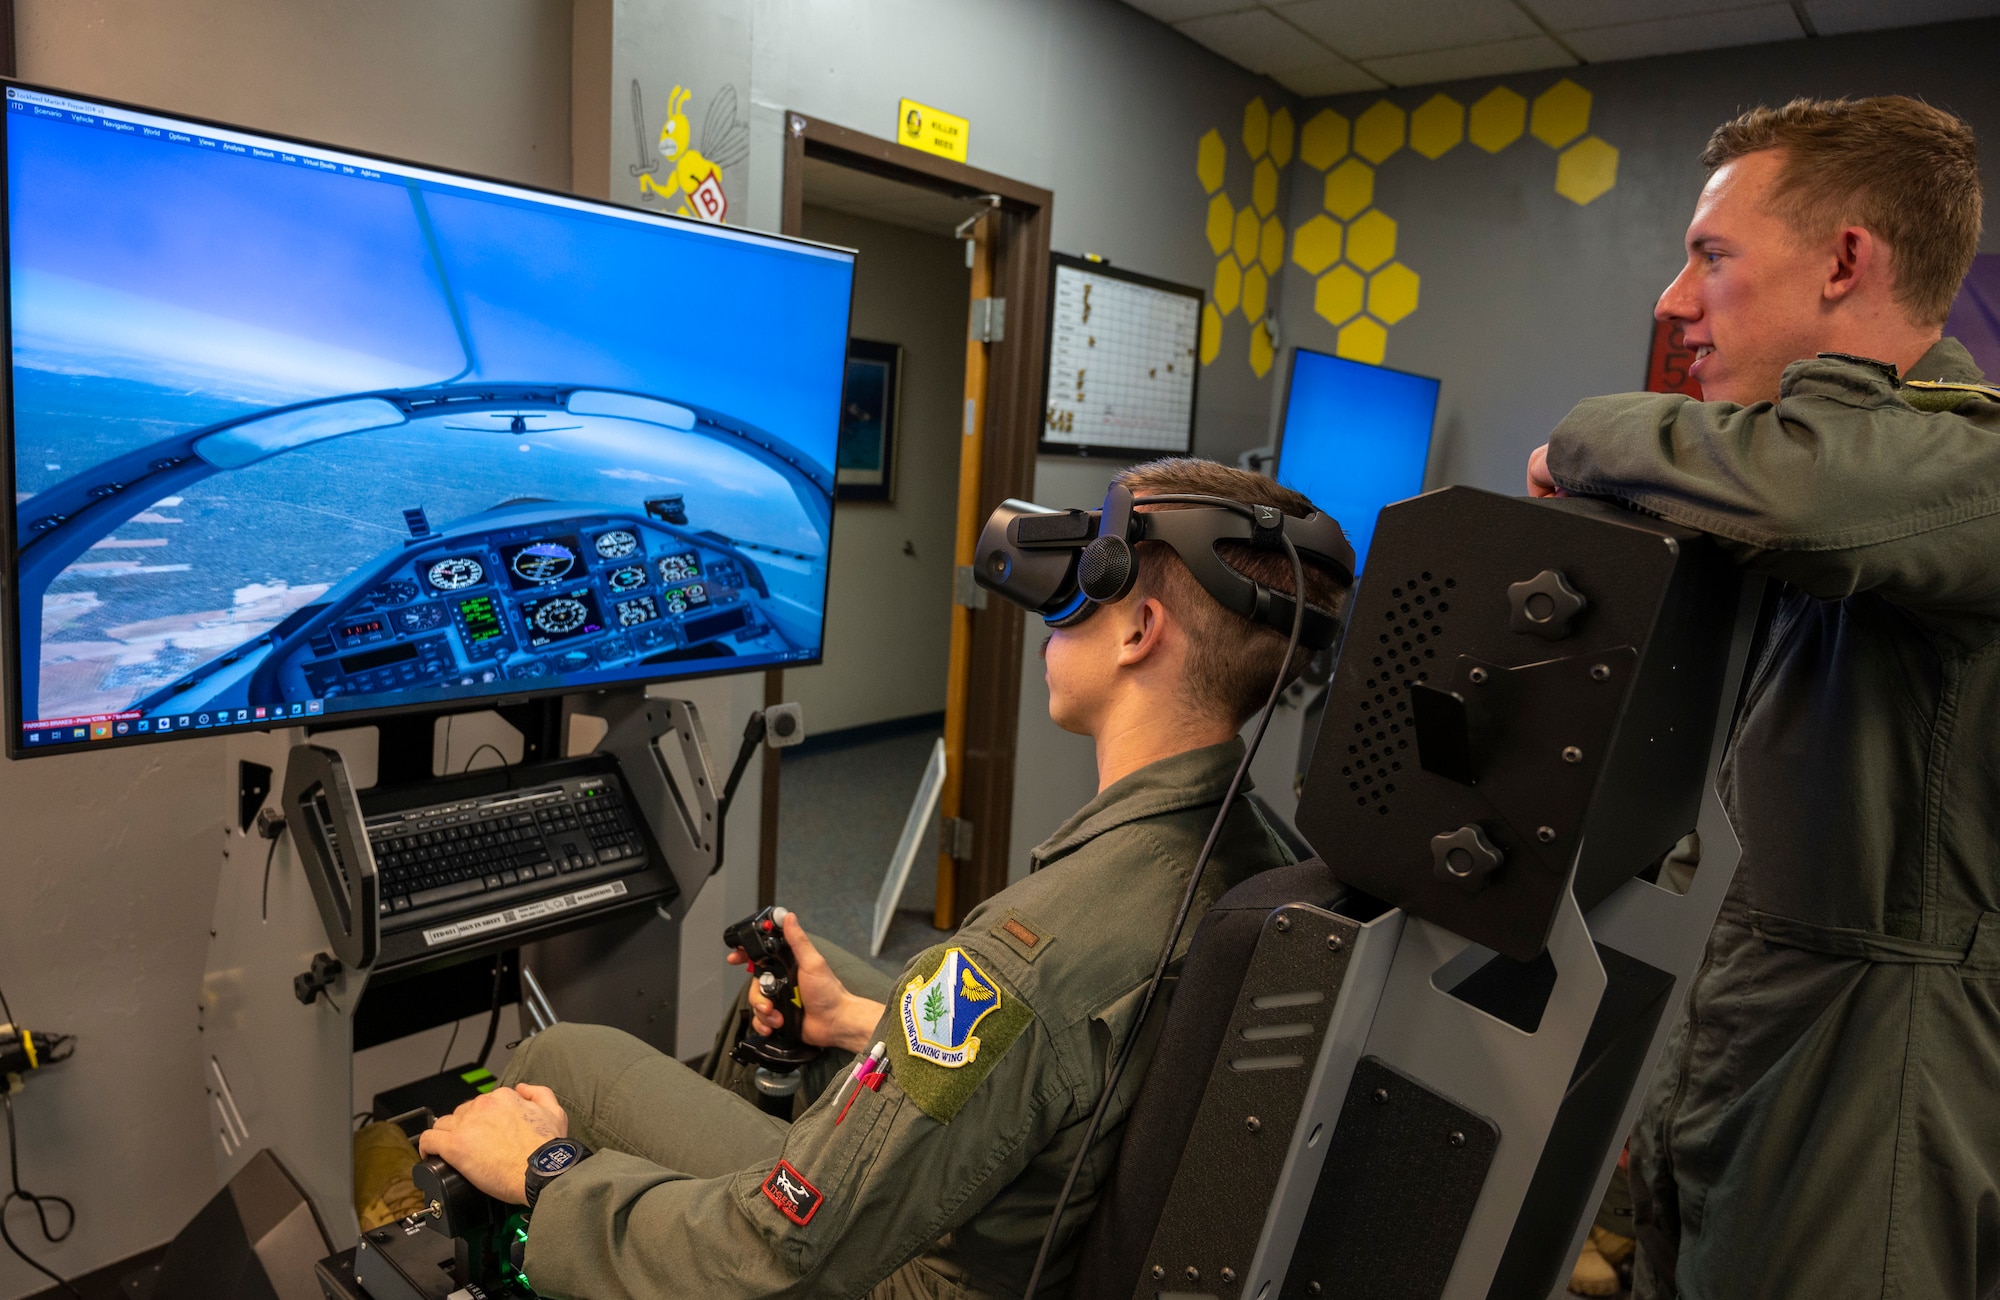 Pilots from the 85th Flying Training Wing Bee Flight use a Virtual Reality flight simulator to run maneuvers in the classroom on March 30, 2021, at Laughlin Air Force Base, Texas. Simulators in the classrooms help pilots work on specific parts of their training to improve. (U.S. Air Force photo by Senior Airman Nicholas Larsen)